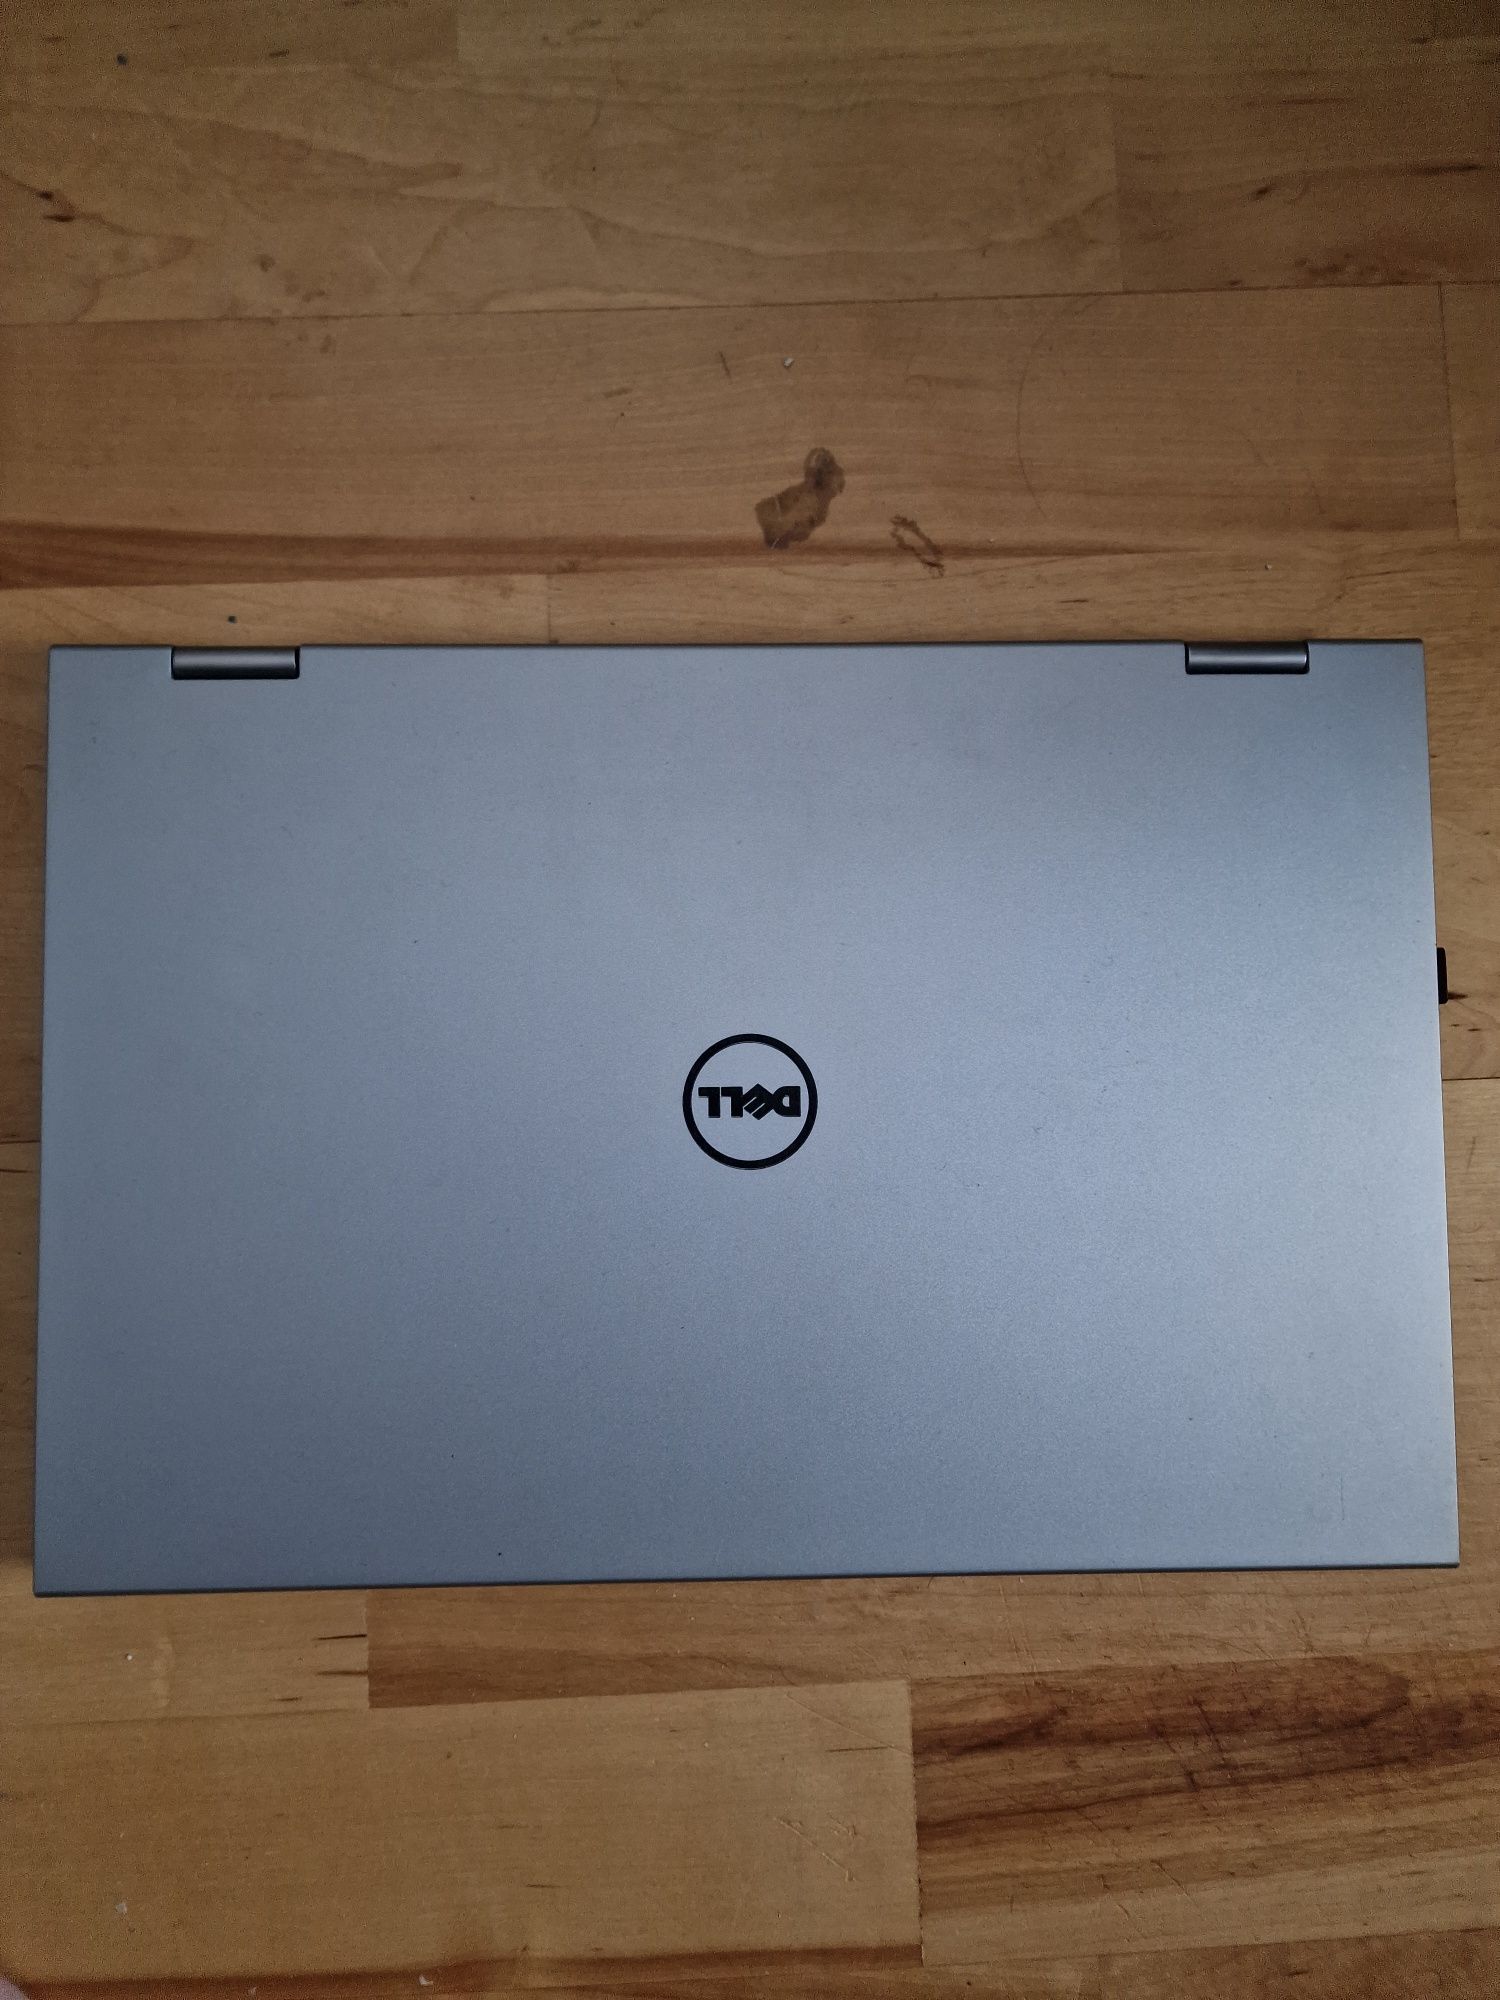 Laptop tablet dell p57g